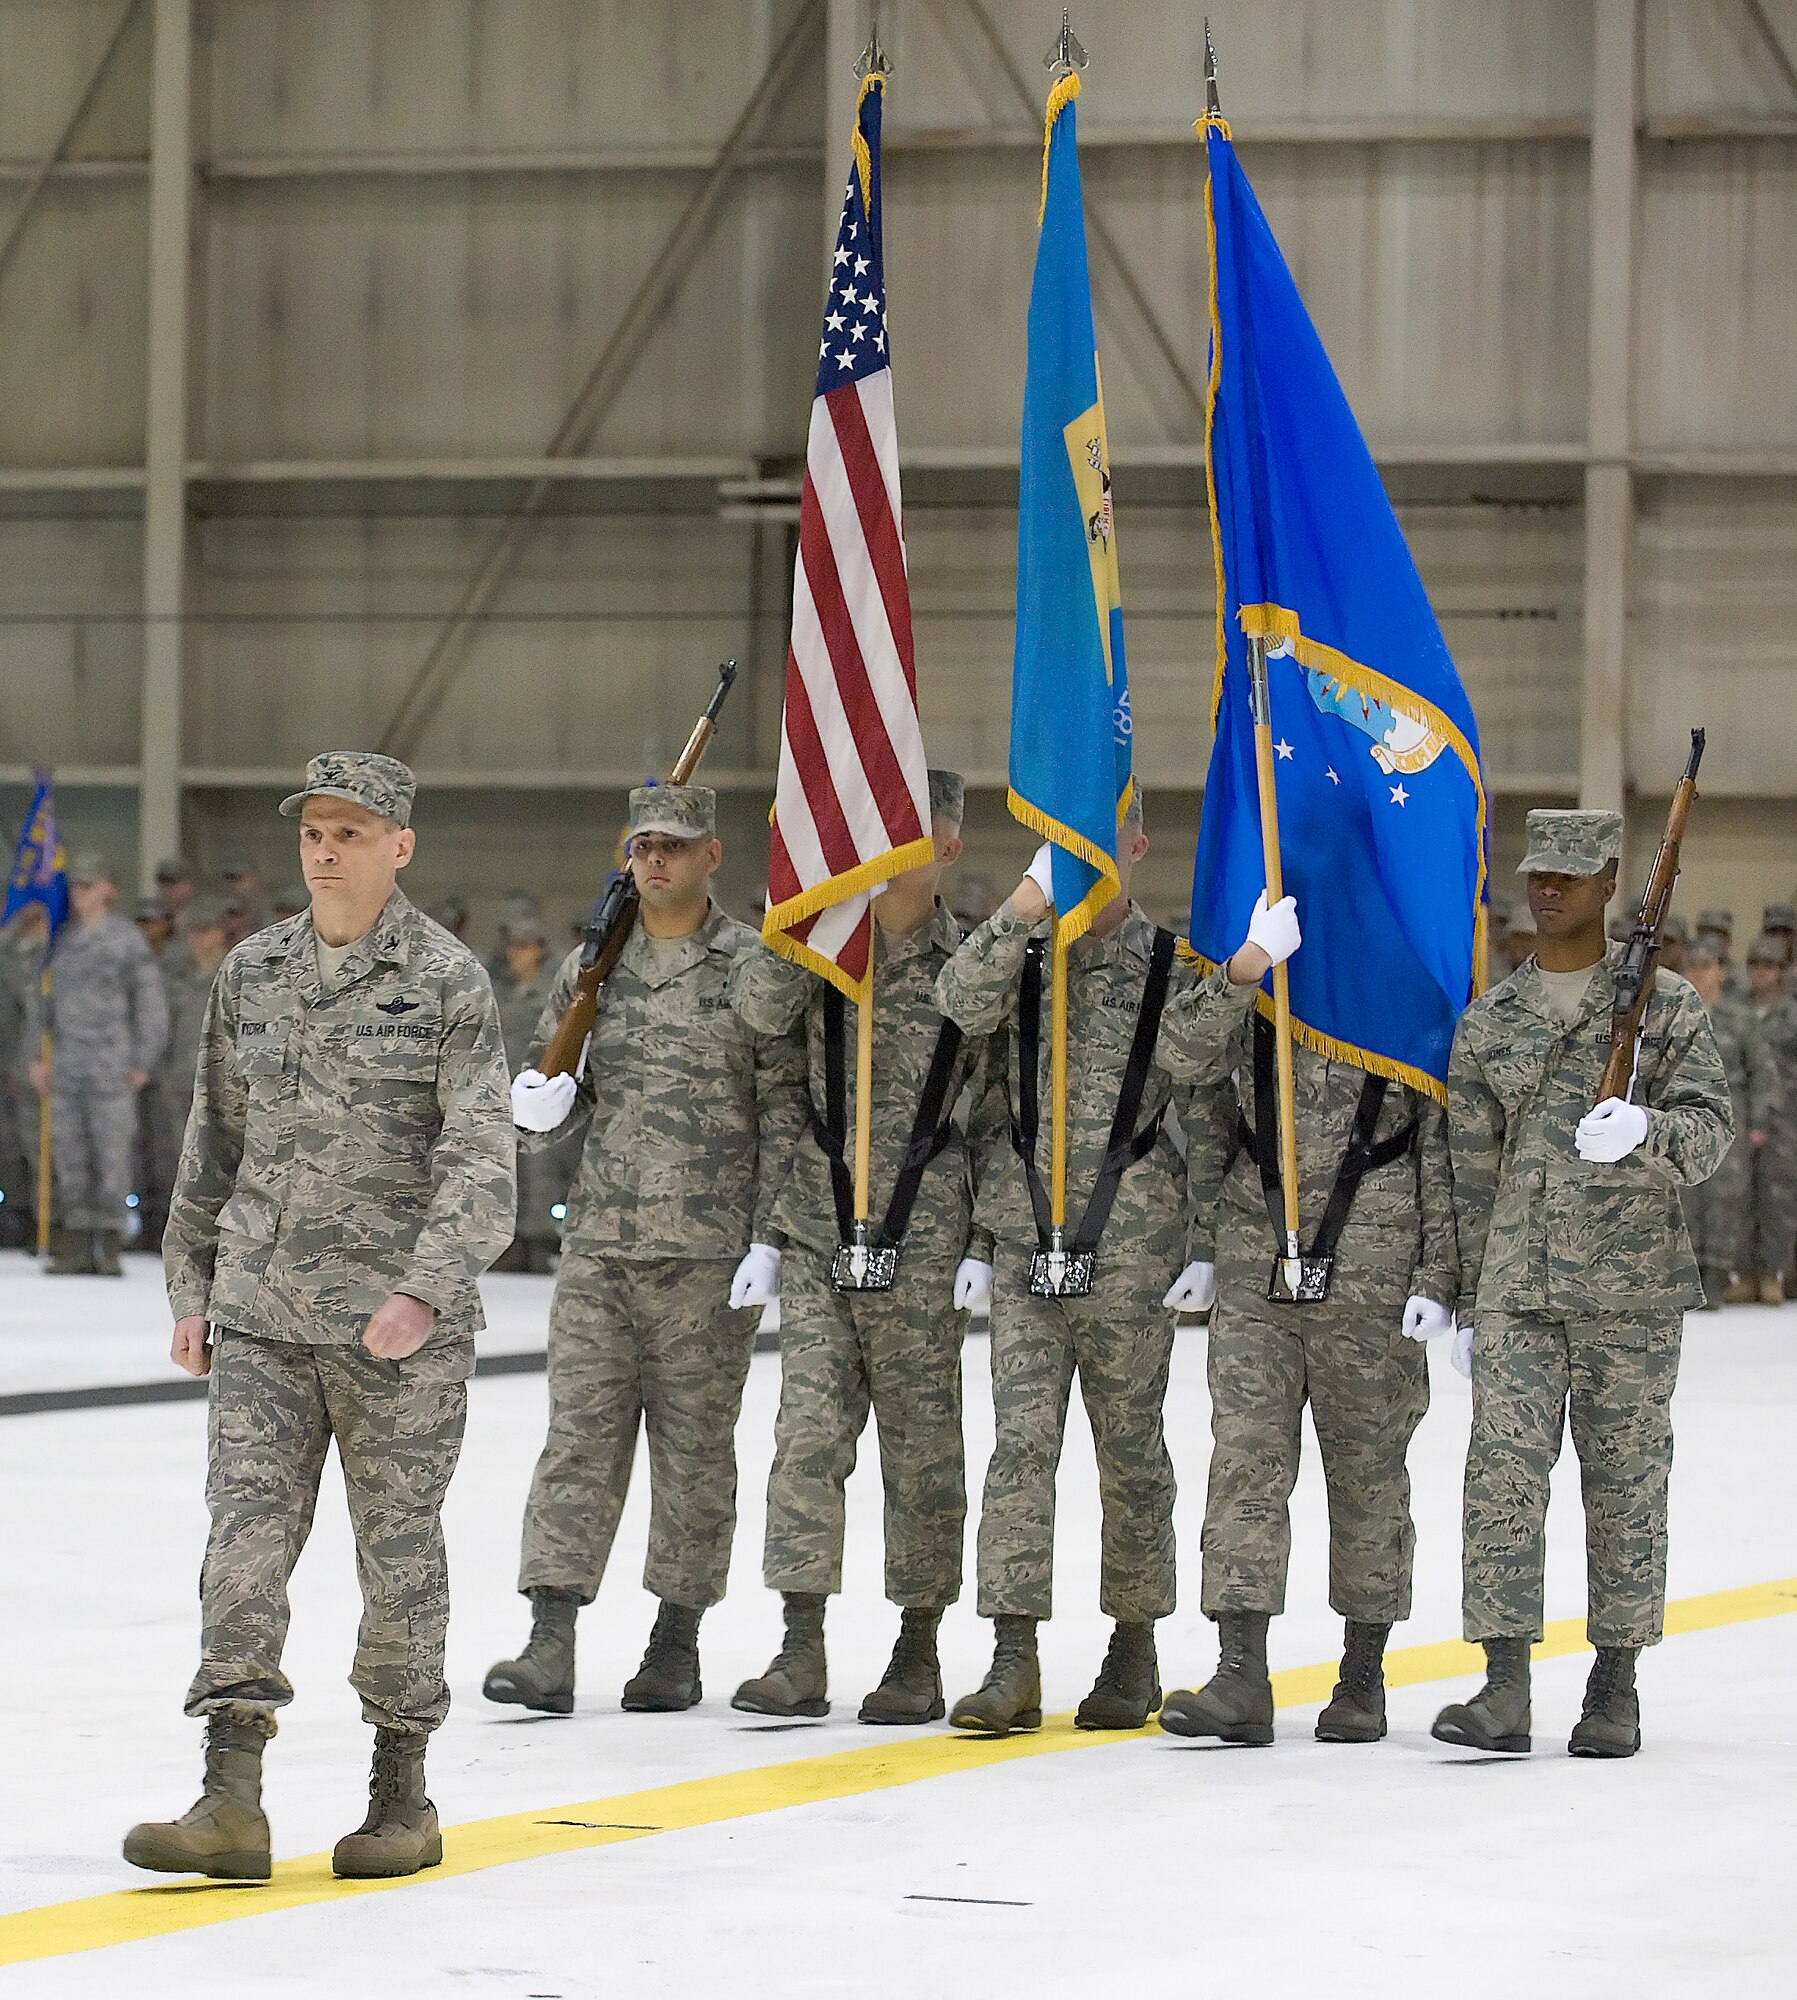 Col. Eric Wydra, 436th Airlift Wing vice commander, presents the colors to Maj. Gen. Winfield W. Scott III, during the change-of-command ceremony Jan. 9. Col. Manson O. Morris assumed command of the Eagle Wing from Col. Steven B. Harrison. (U.S. Air Force photo/Roland Balik)